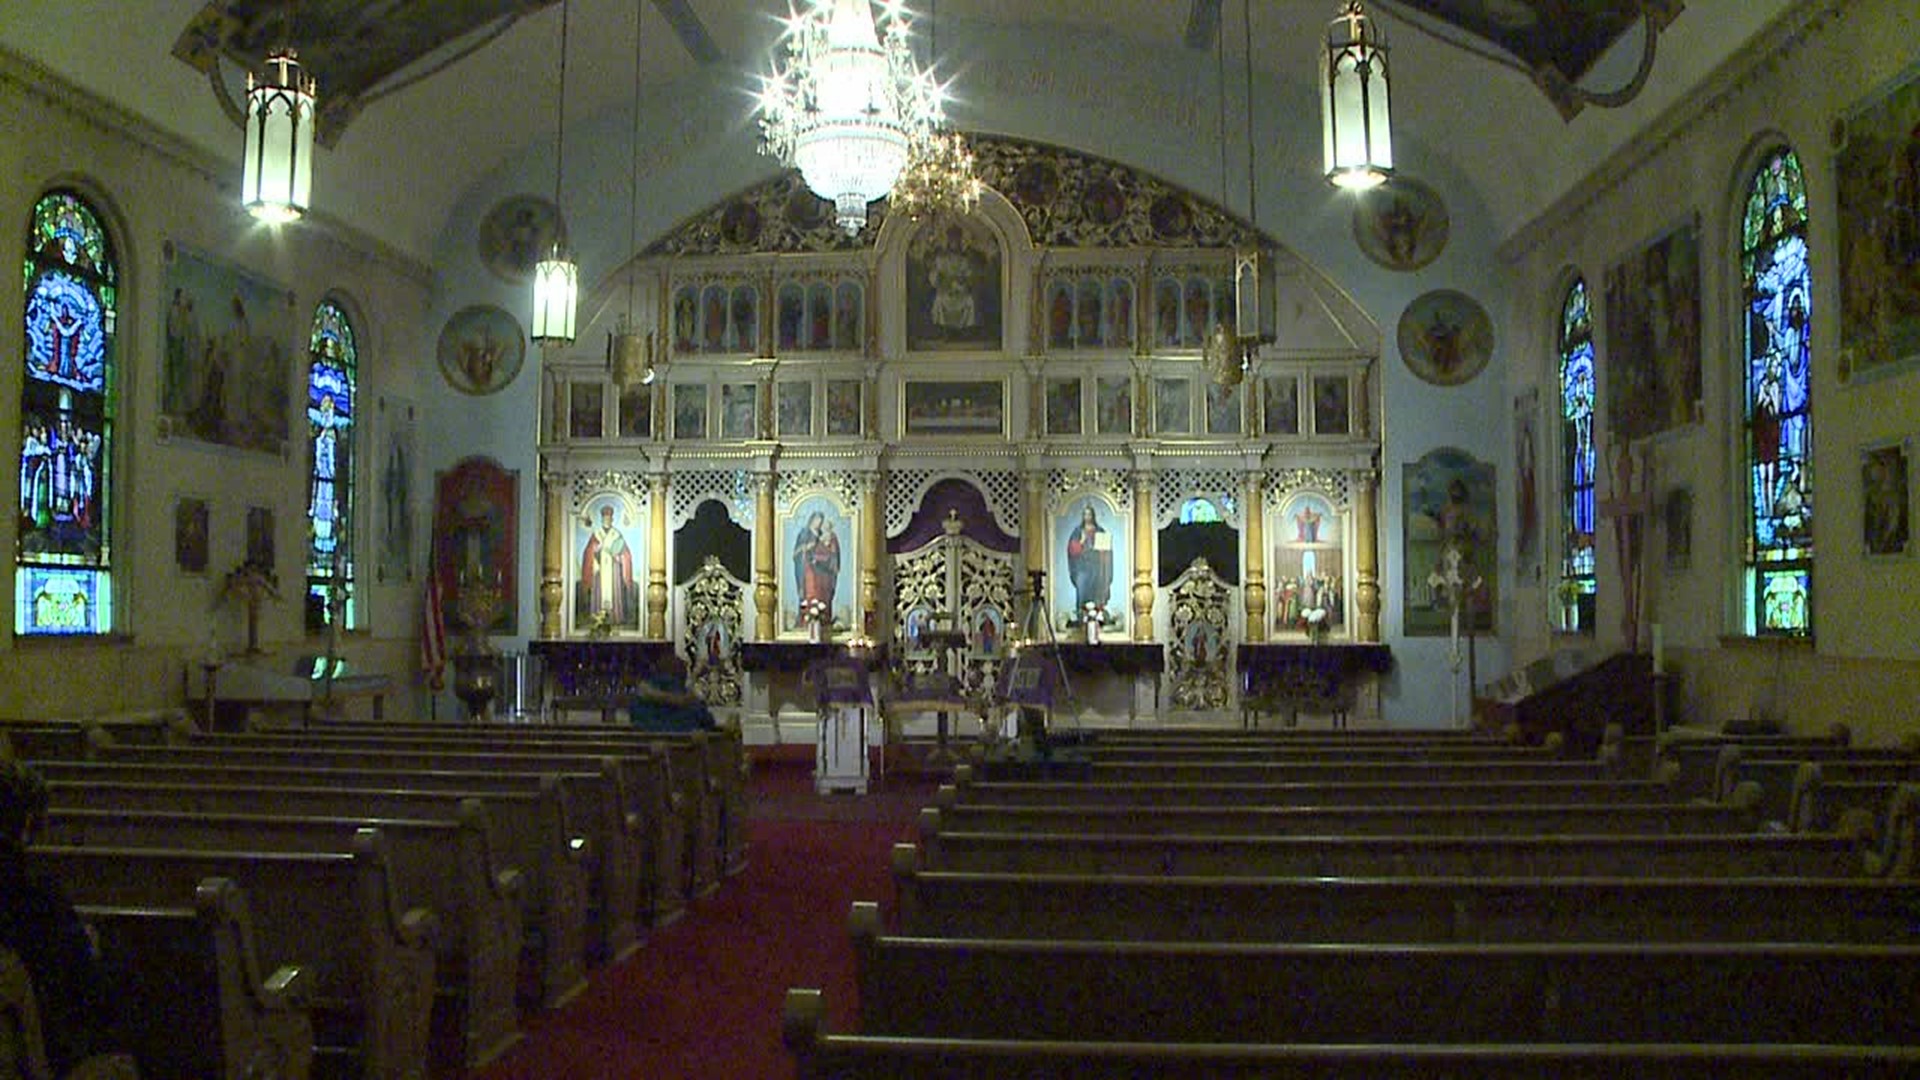 The prayers are for those affected by the Russian invasion. The Schuylkill County church's new pastor has direct ties to Ukraine.